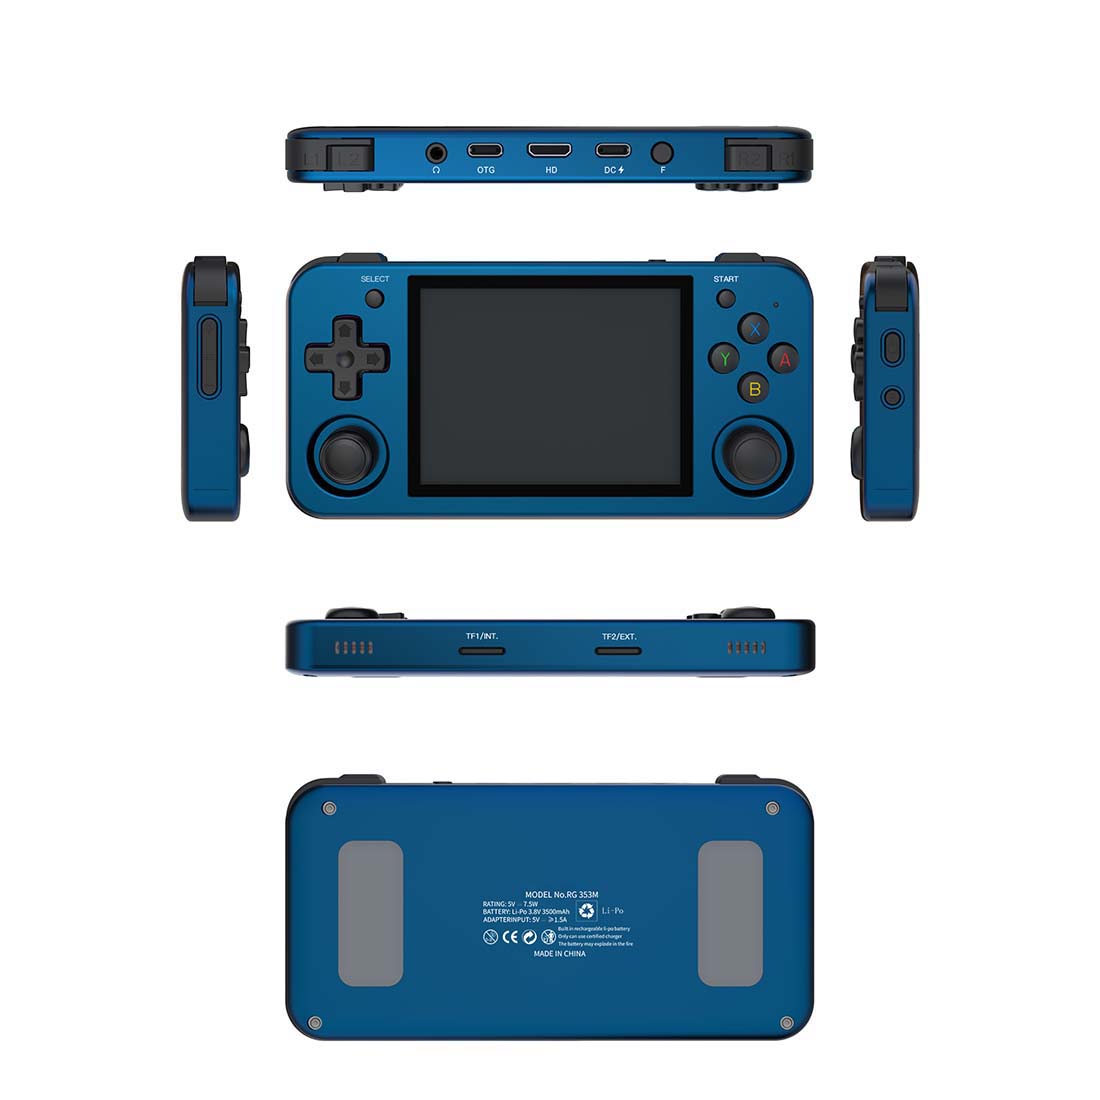 Anbernic RG353M 3.5-Inch Handheld Game Console